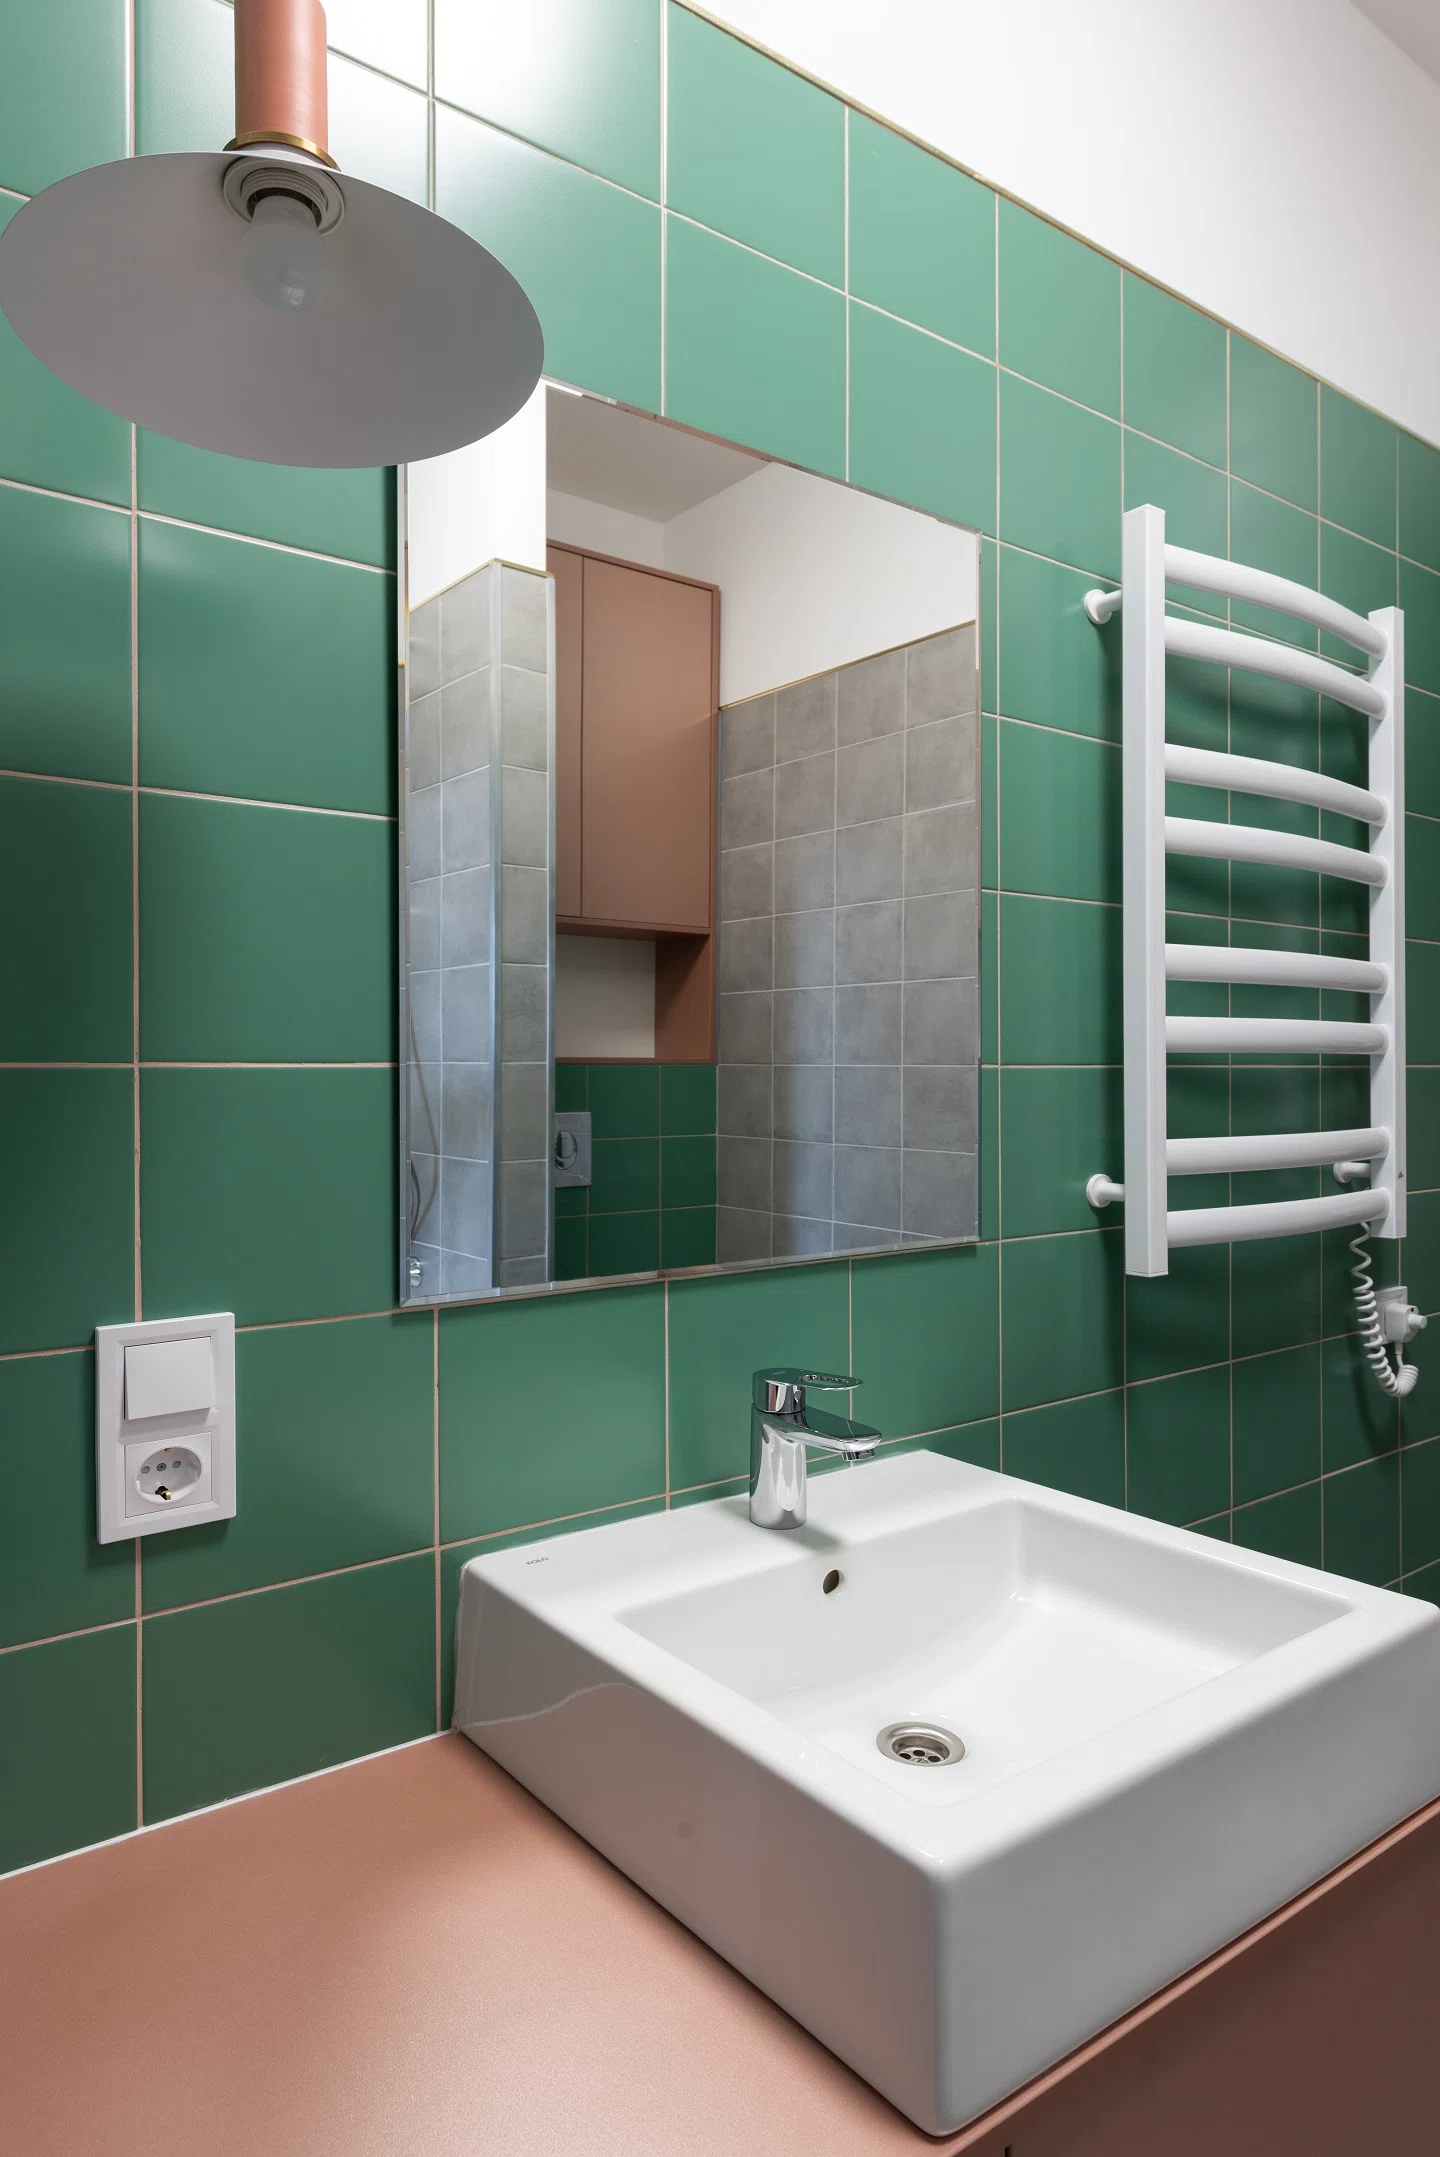 Forest Green Wall Tiles in Your Home Décor